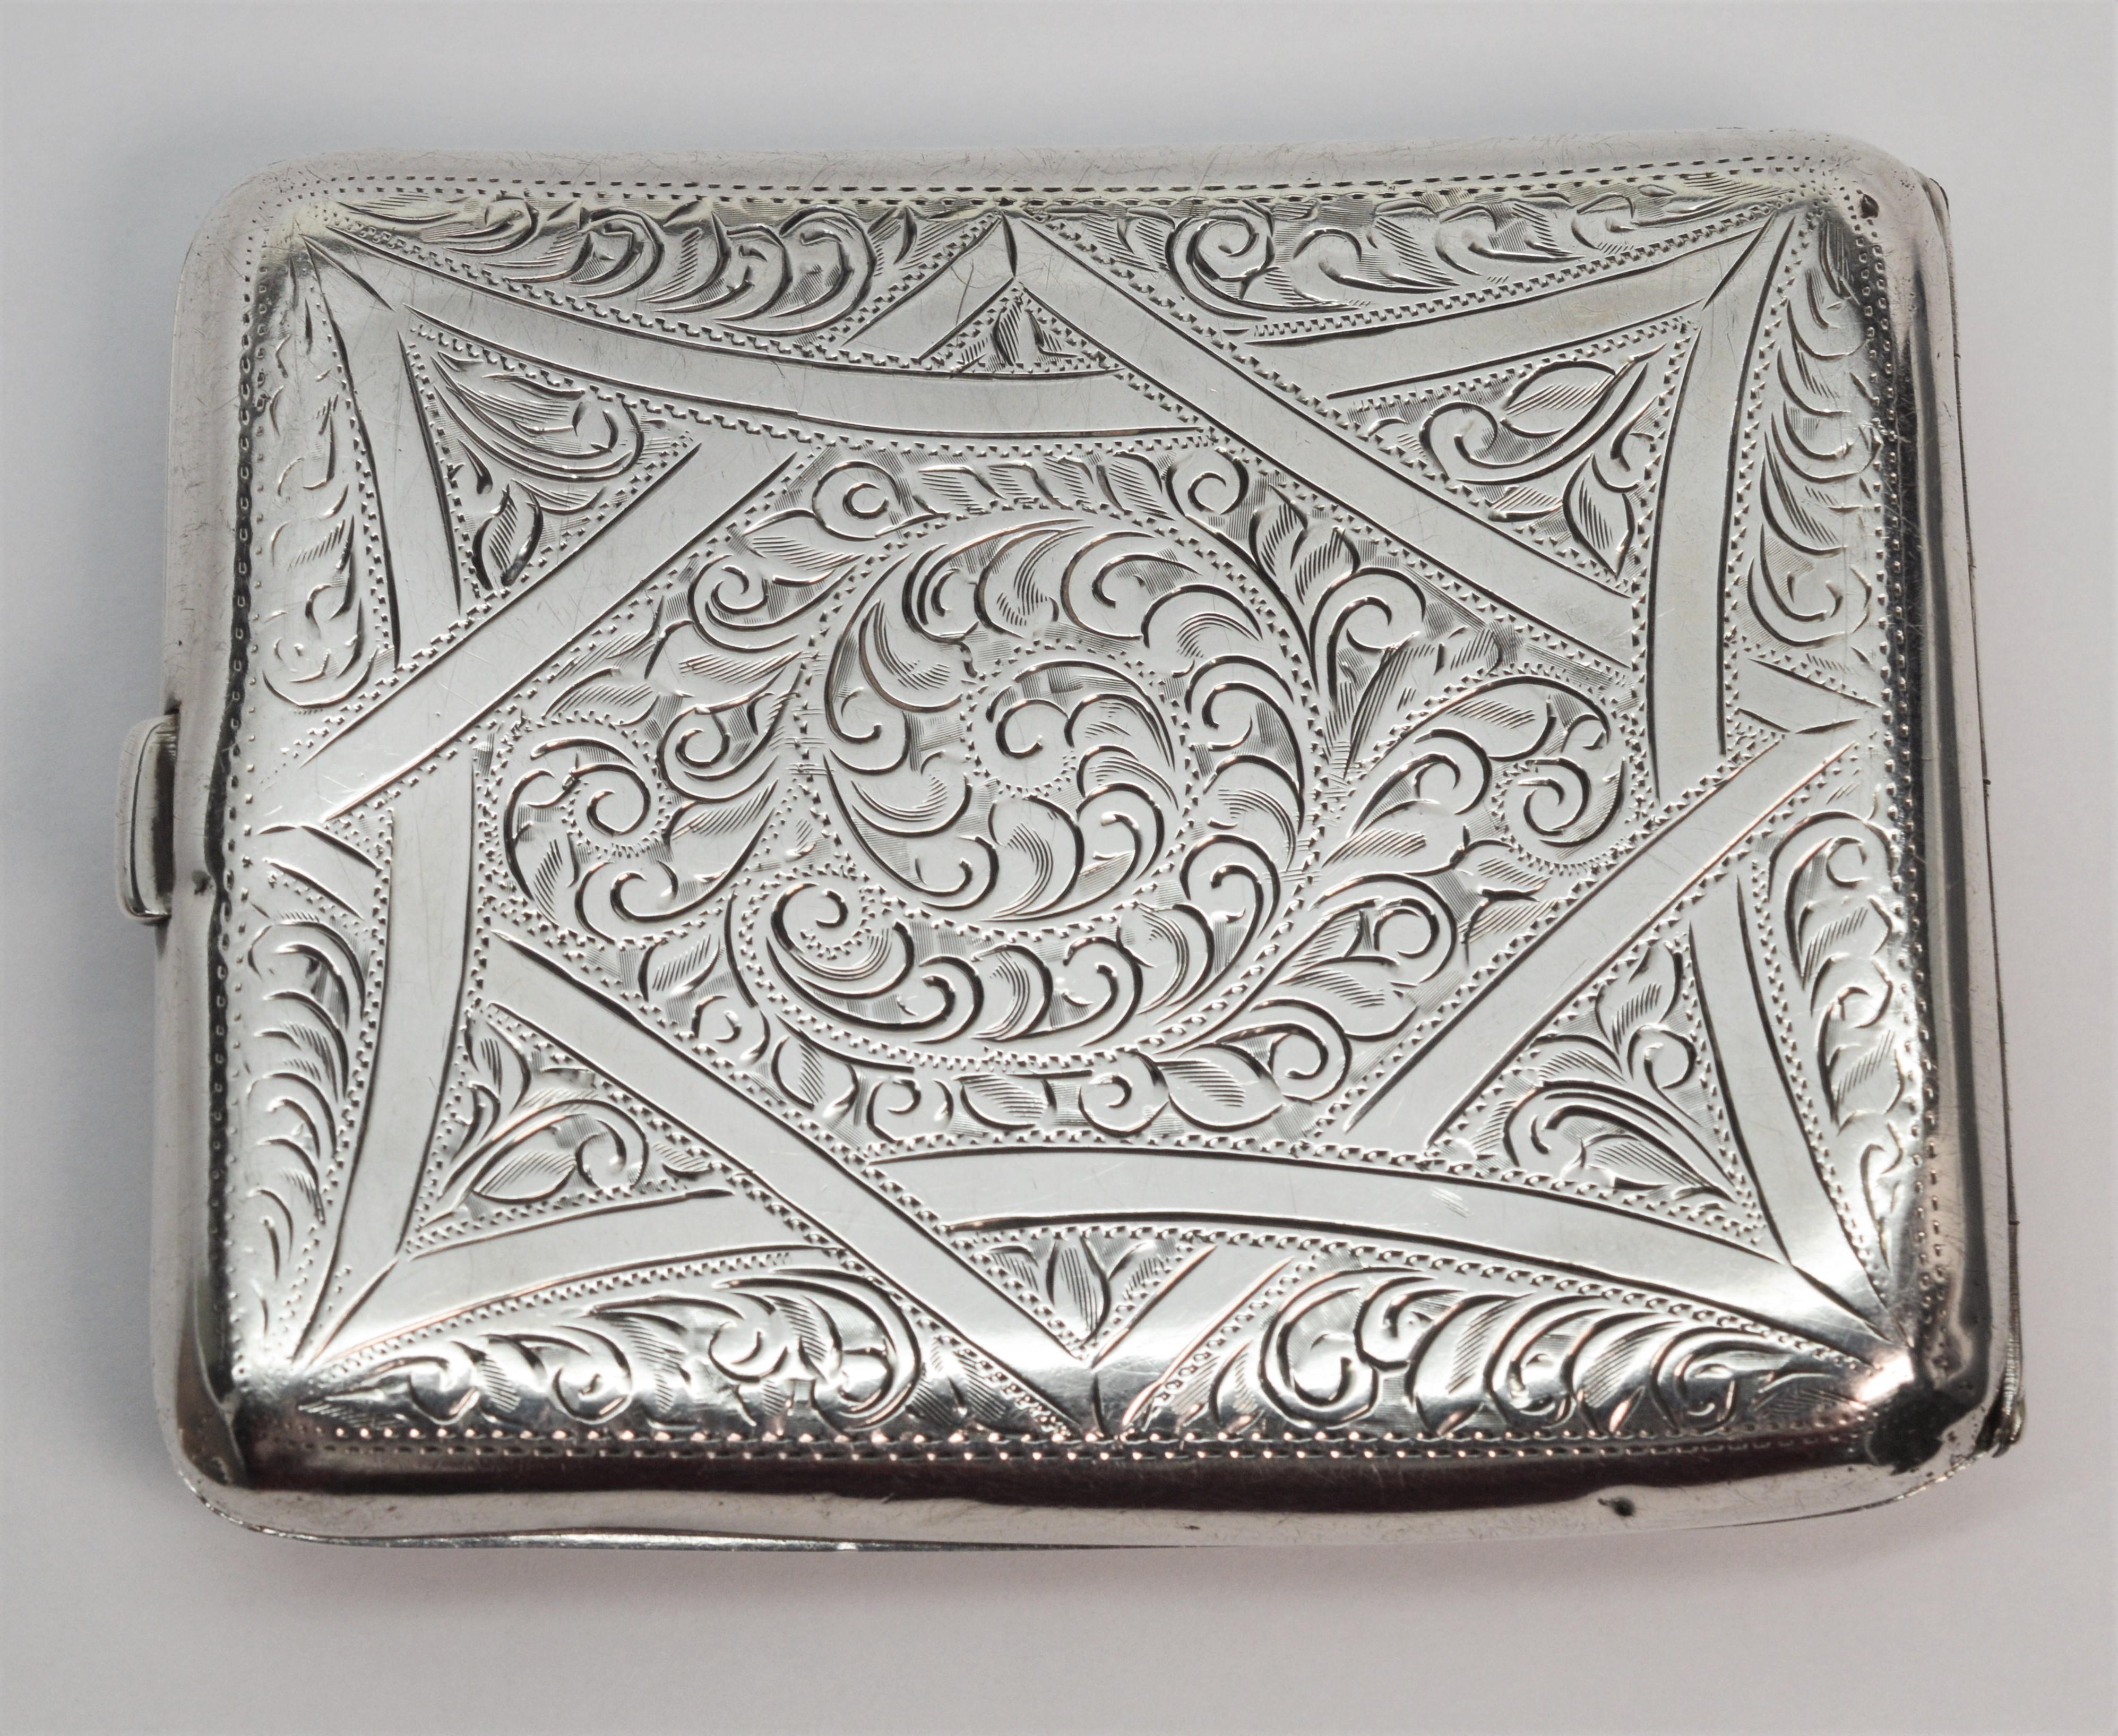 With British hallmarks, made in Birmingham England by Henry Williamson, circa 1924, admire the hand engraving on this beautiful antique sterling silver cigarette case. 
Measures 3-1/8 x 4 mm and fitted with clip closure and hinge which are both in